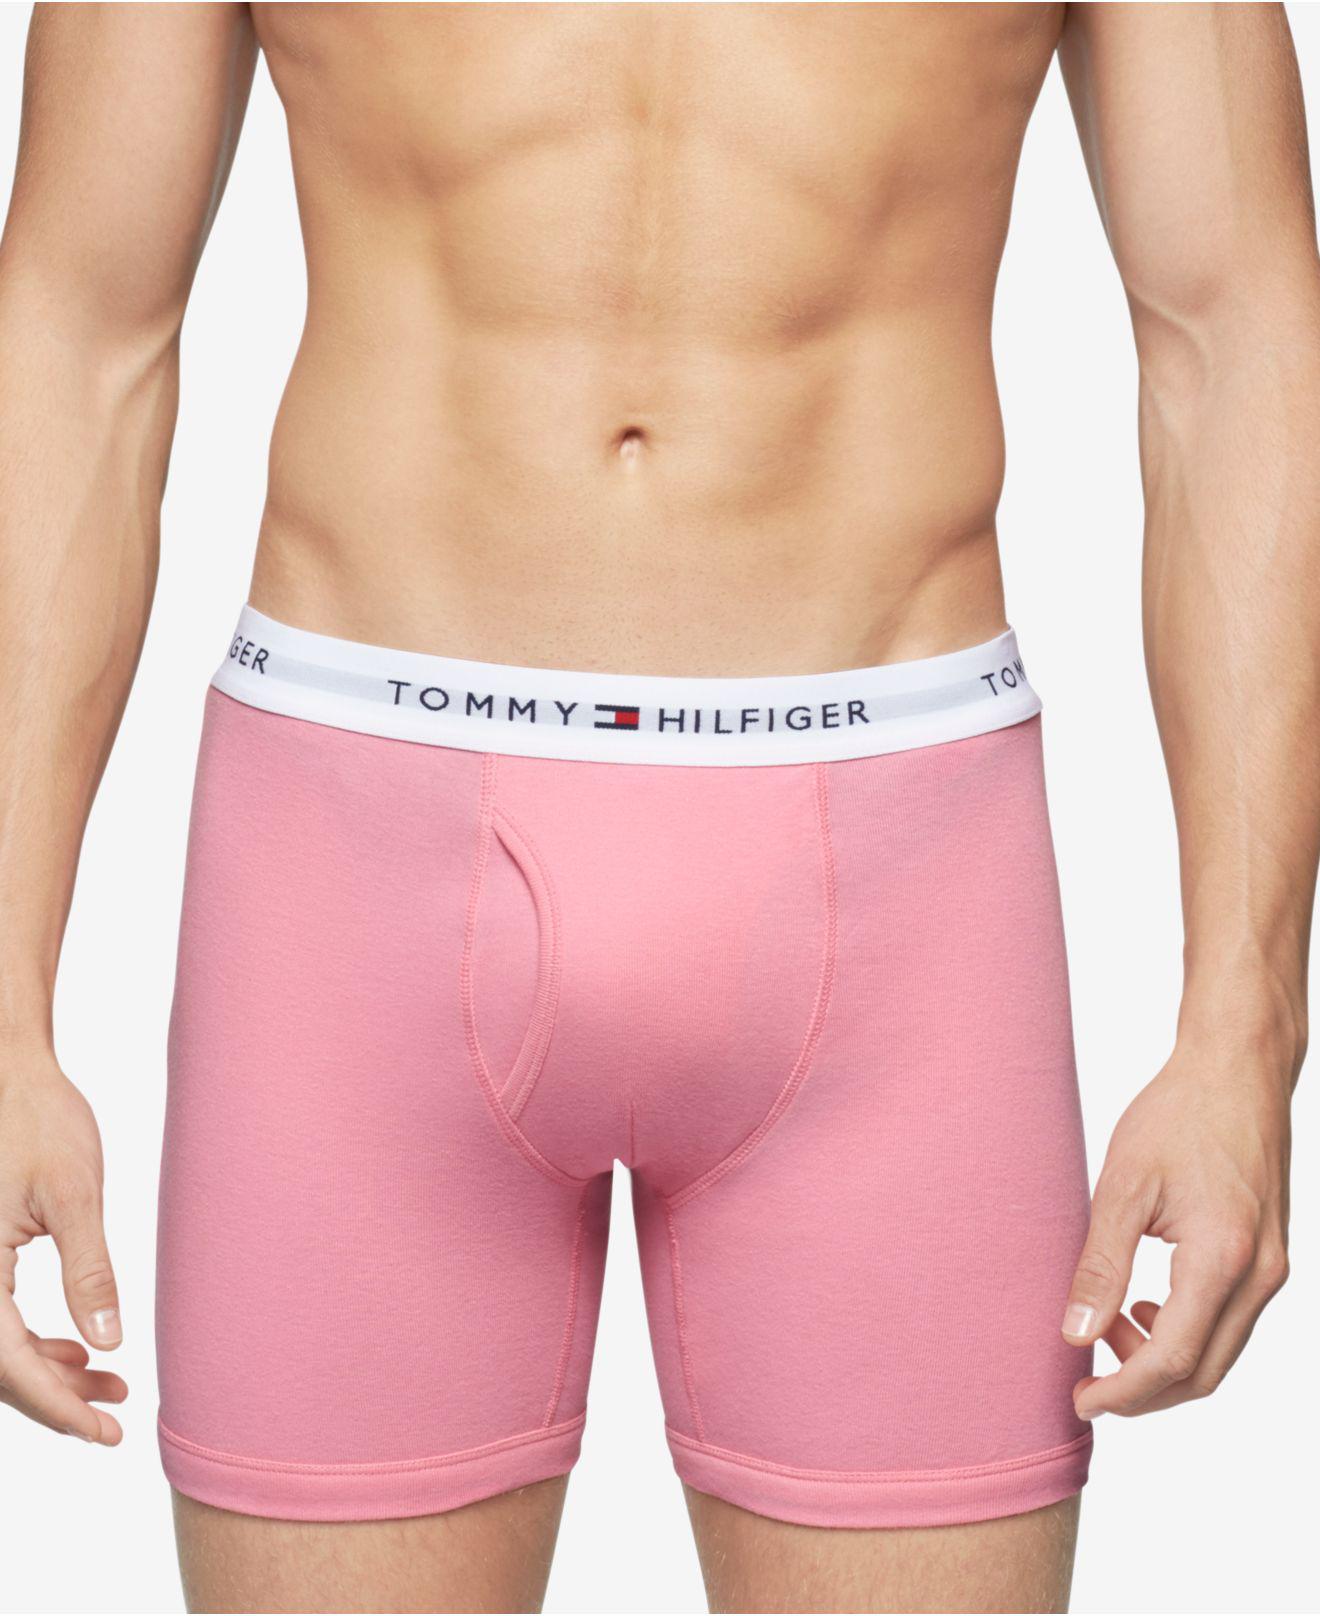 tommy hilfiger boxers pink 